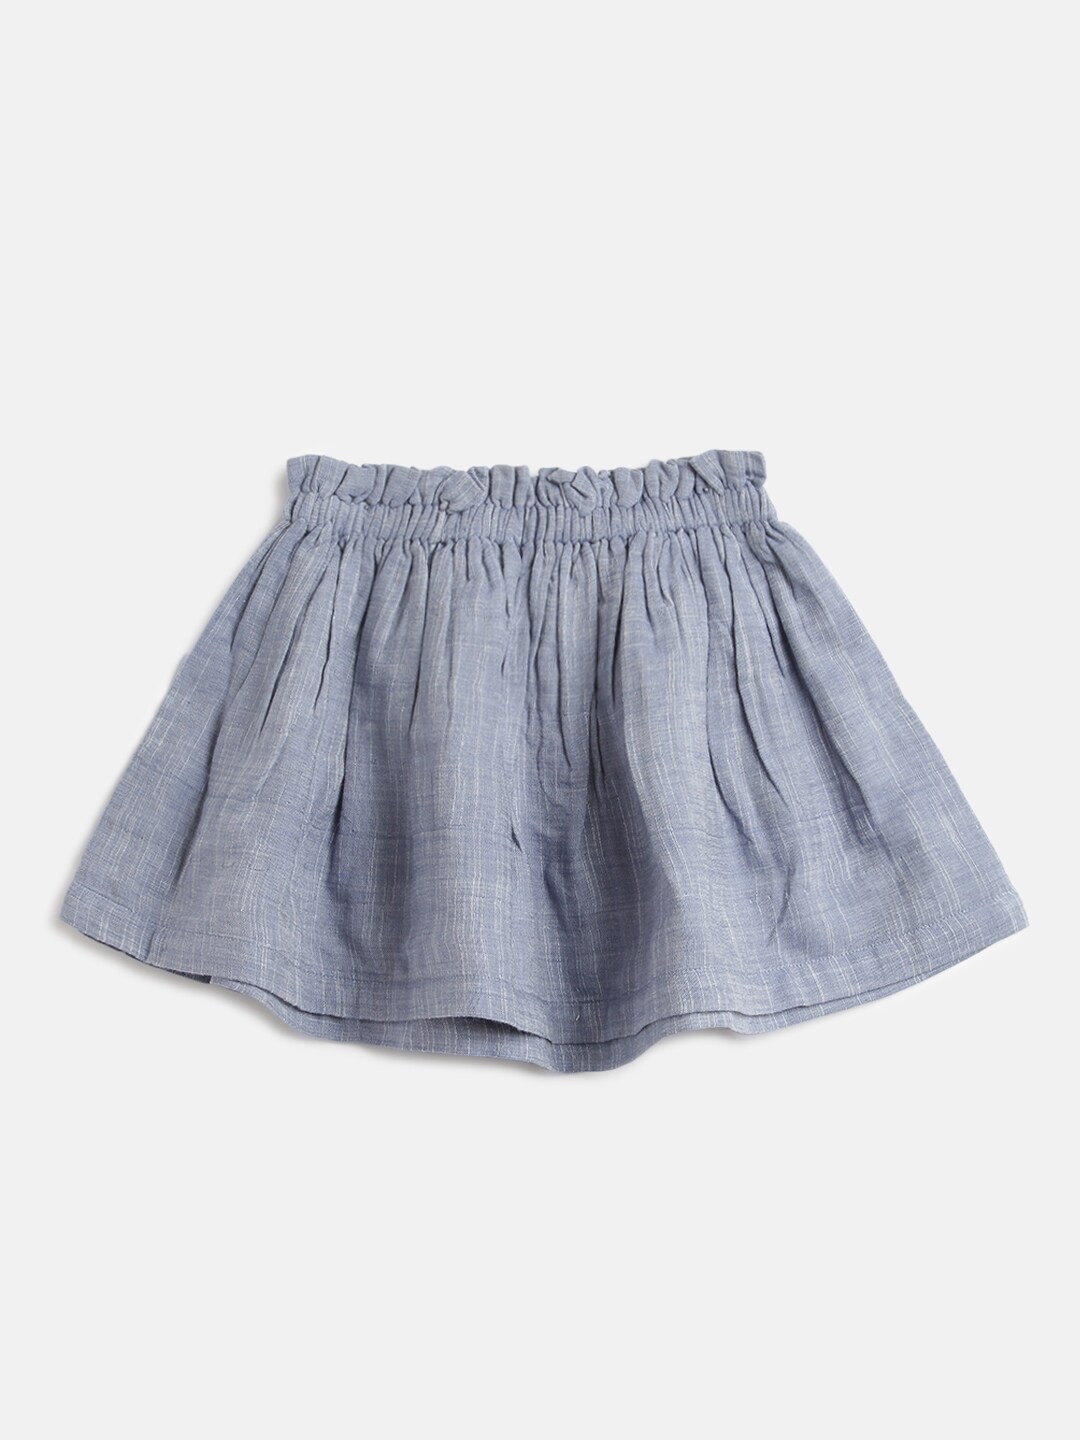 Buy Kids On Board Infant Girls Pure Cotton Midi A Line Skirt - Skirts for  Girls 22398958